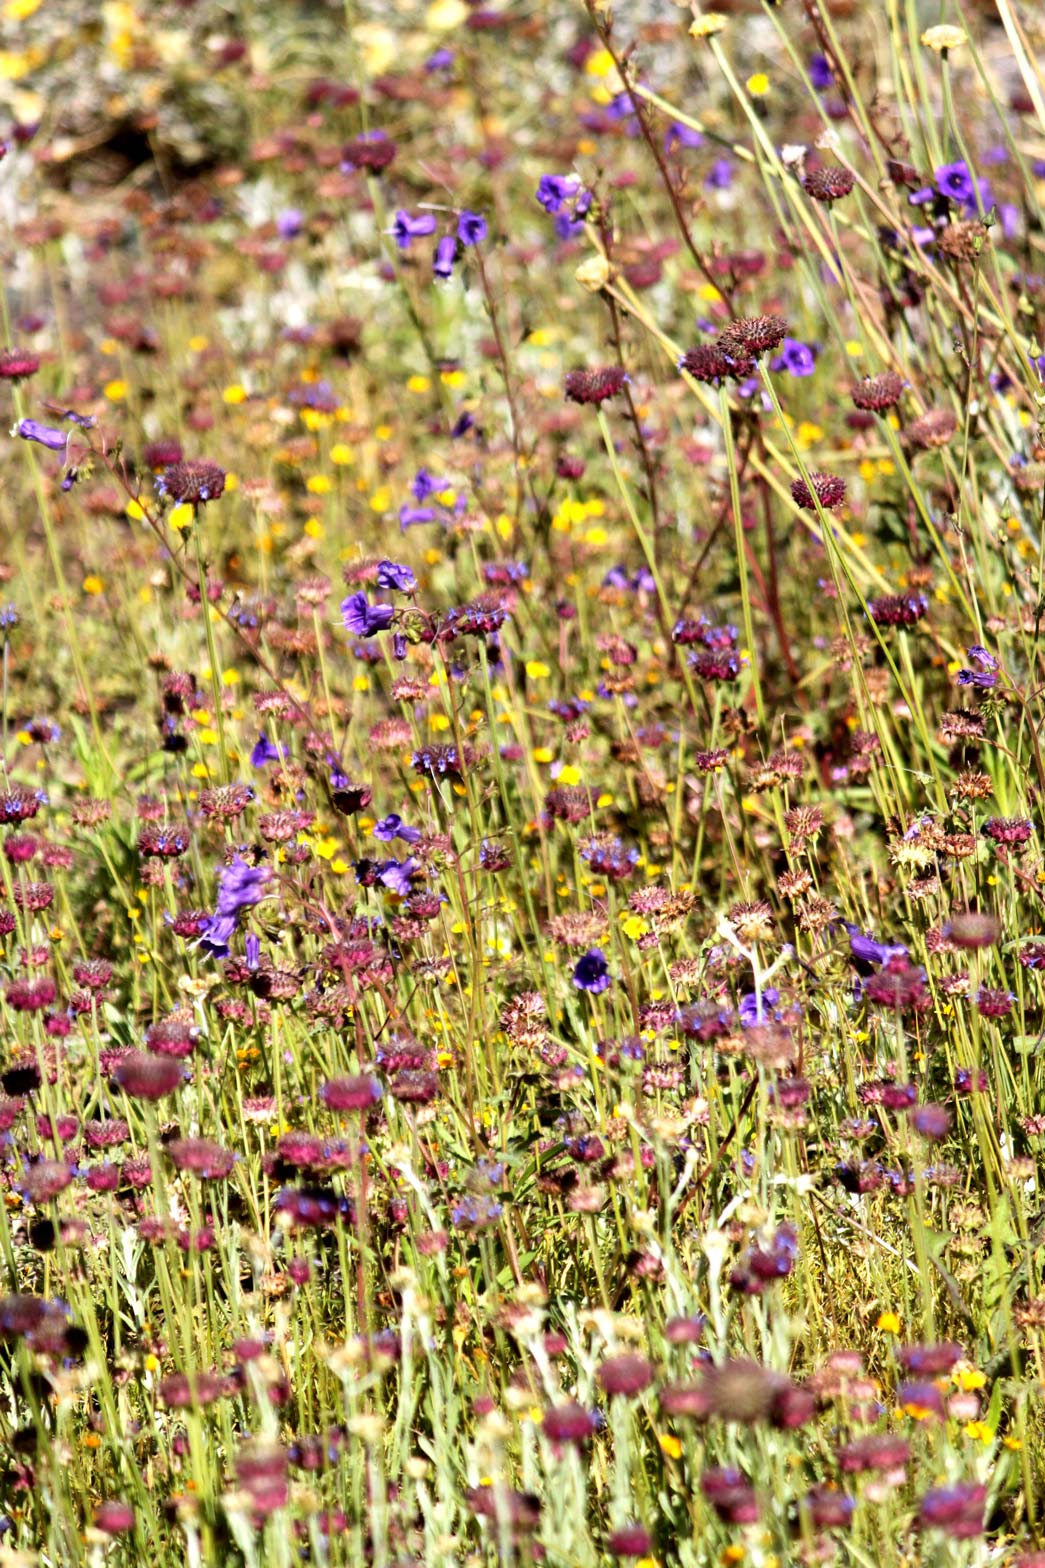 Chia flowers bloom among a variety of wildflowers in the Wildflower Field.